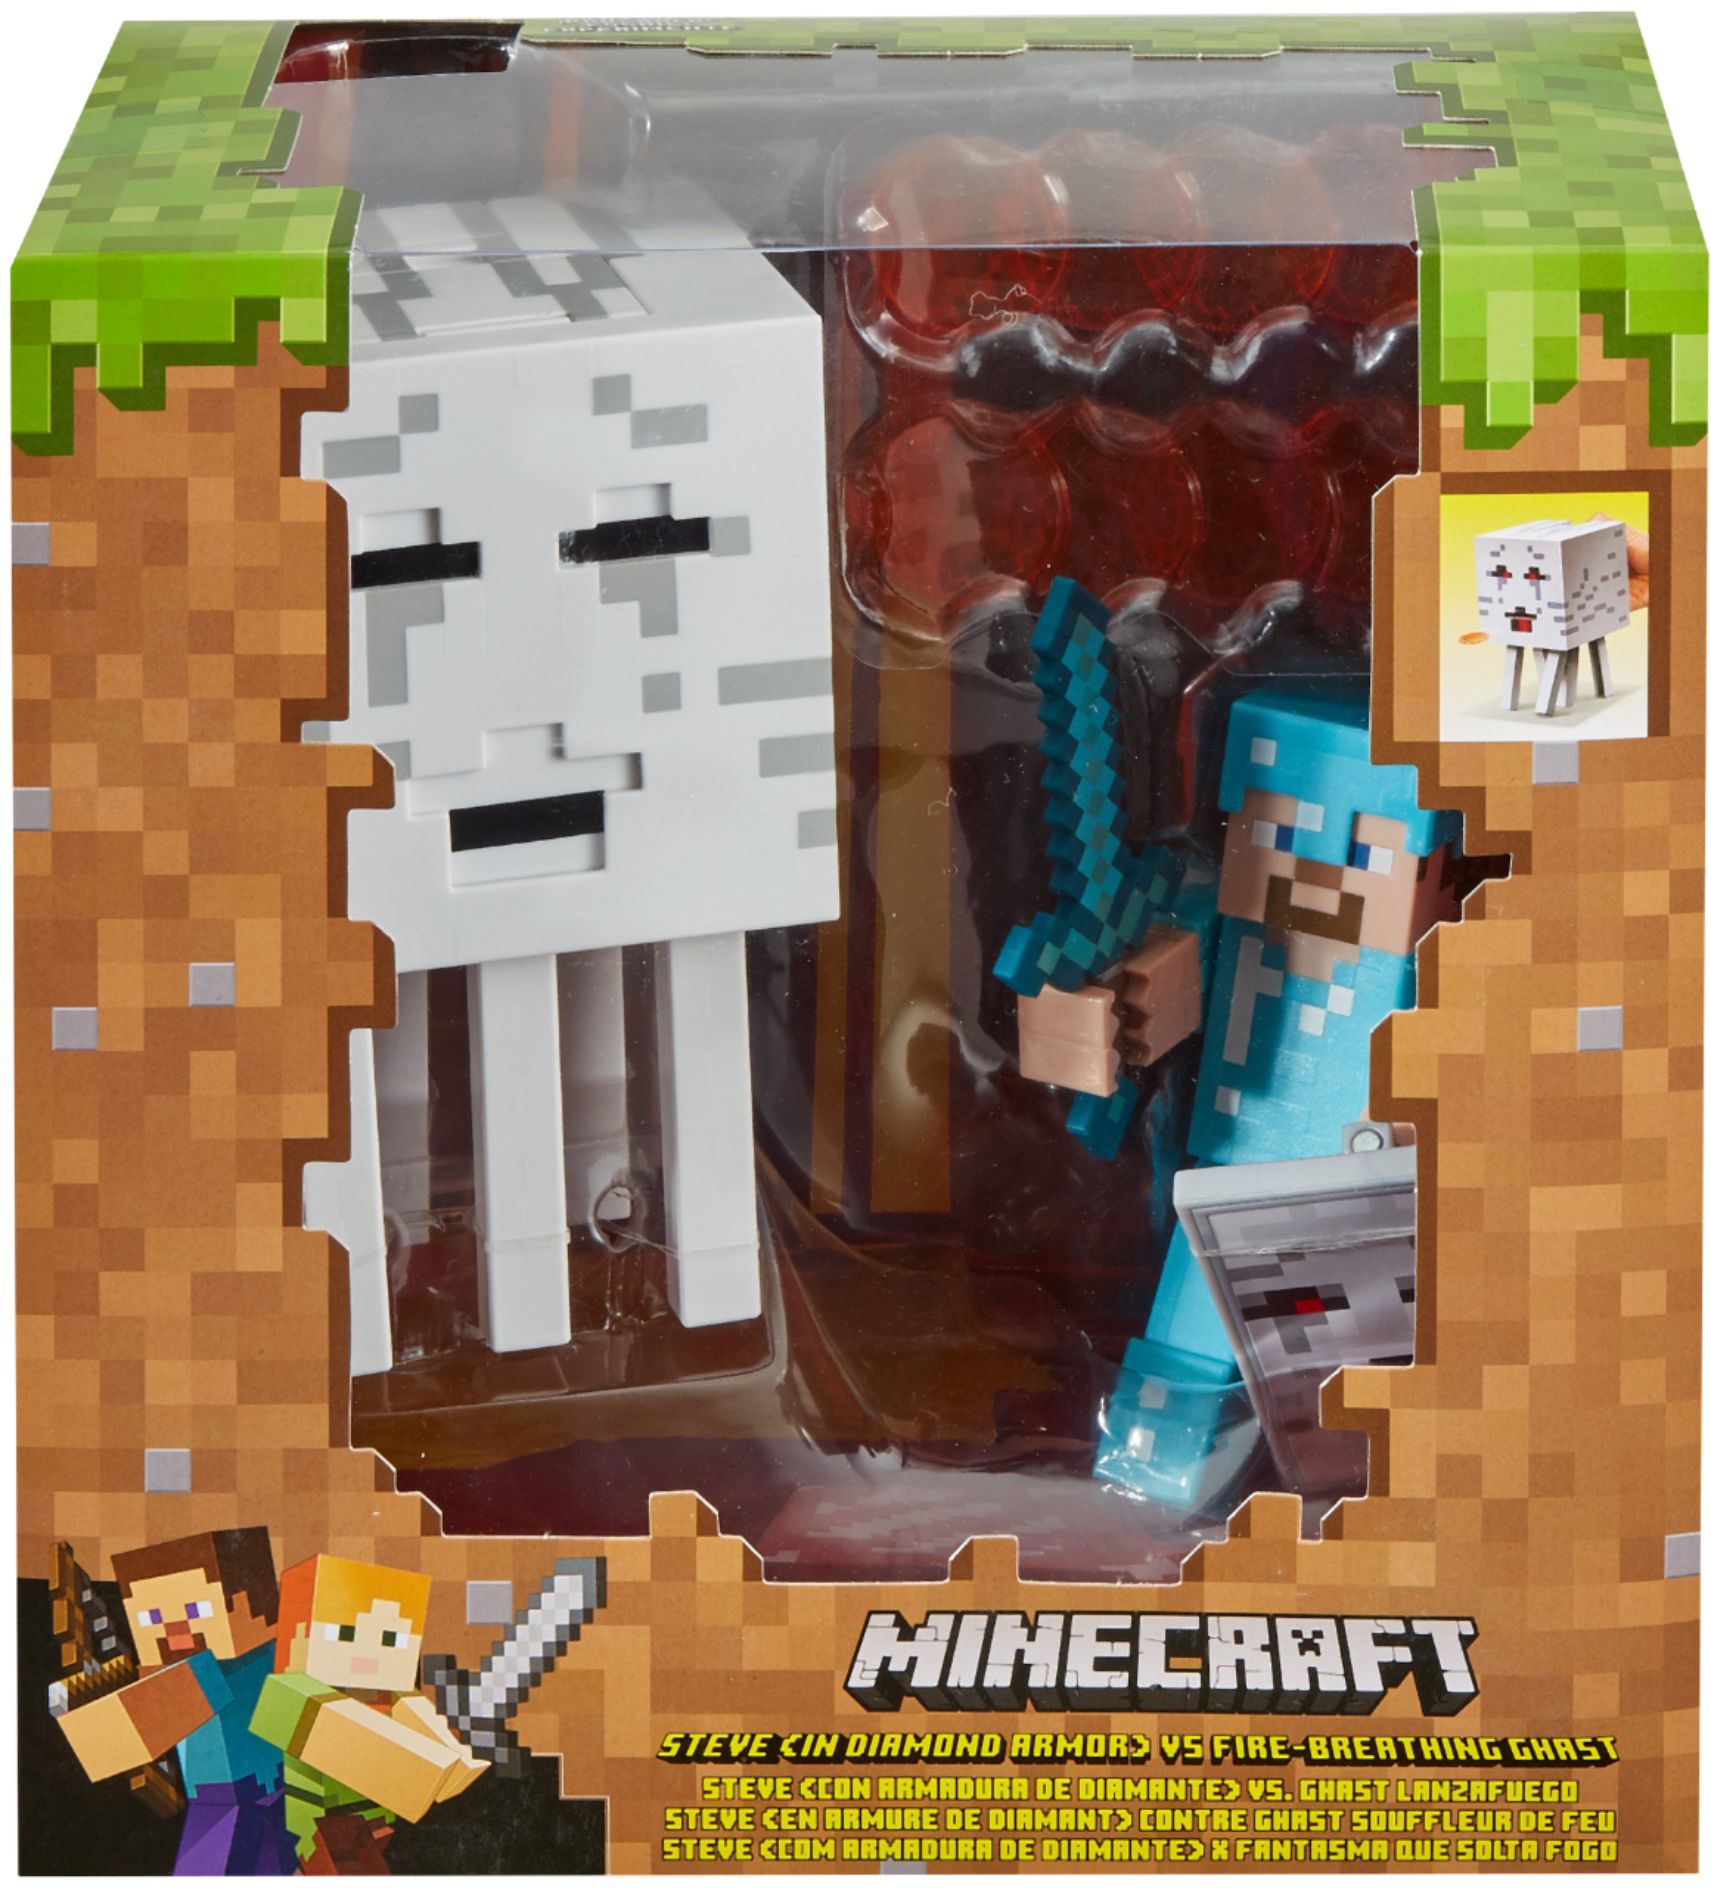 Left View: Minecraft - Battle In A Box - Styles May Vary